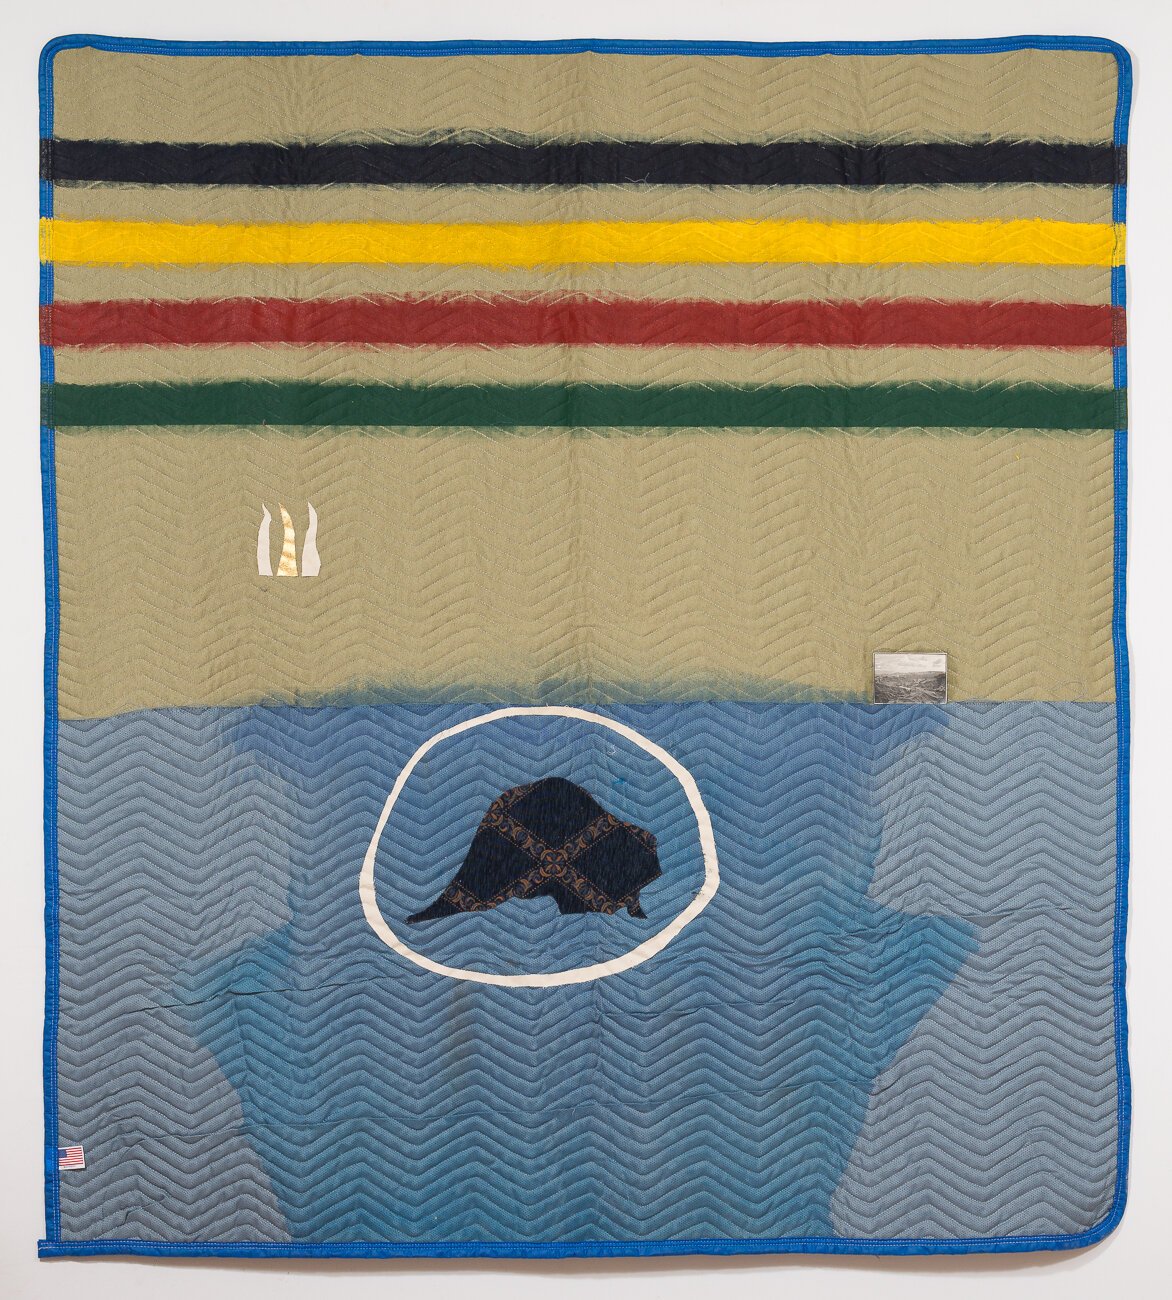 Peter Gynd, Untitled Blanket #1, 2015, acrylic, canvas, gold foil, upholstery fabric, vintage photograph on packing blanket, 78 x 72 in.